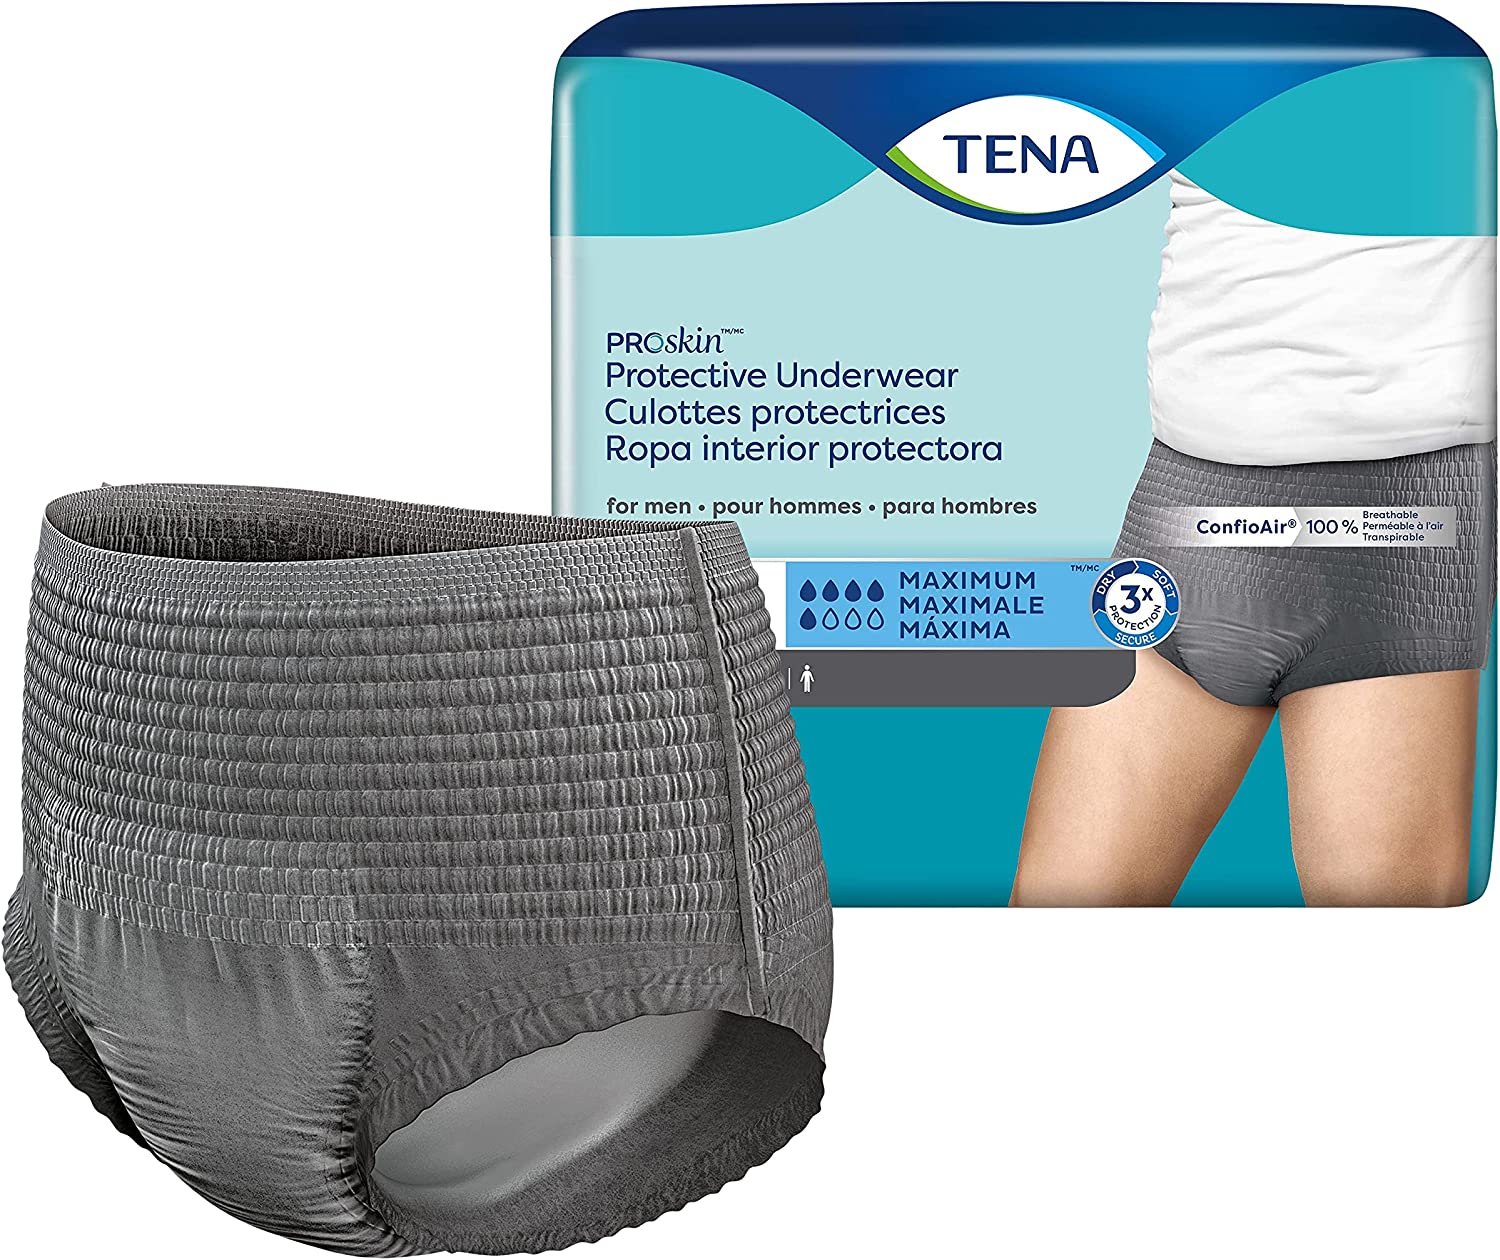 TENA ProSkin Protective Incontinence Underwear for Men, Moderate ...